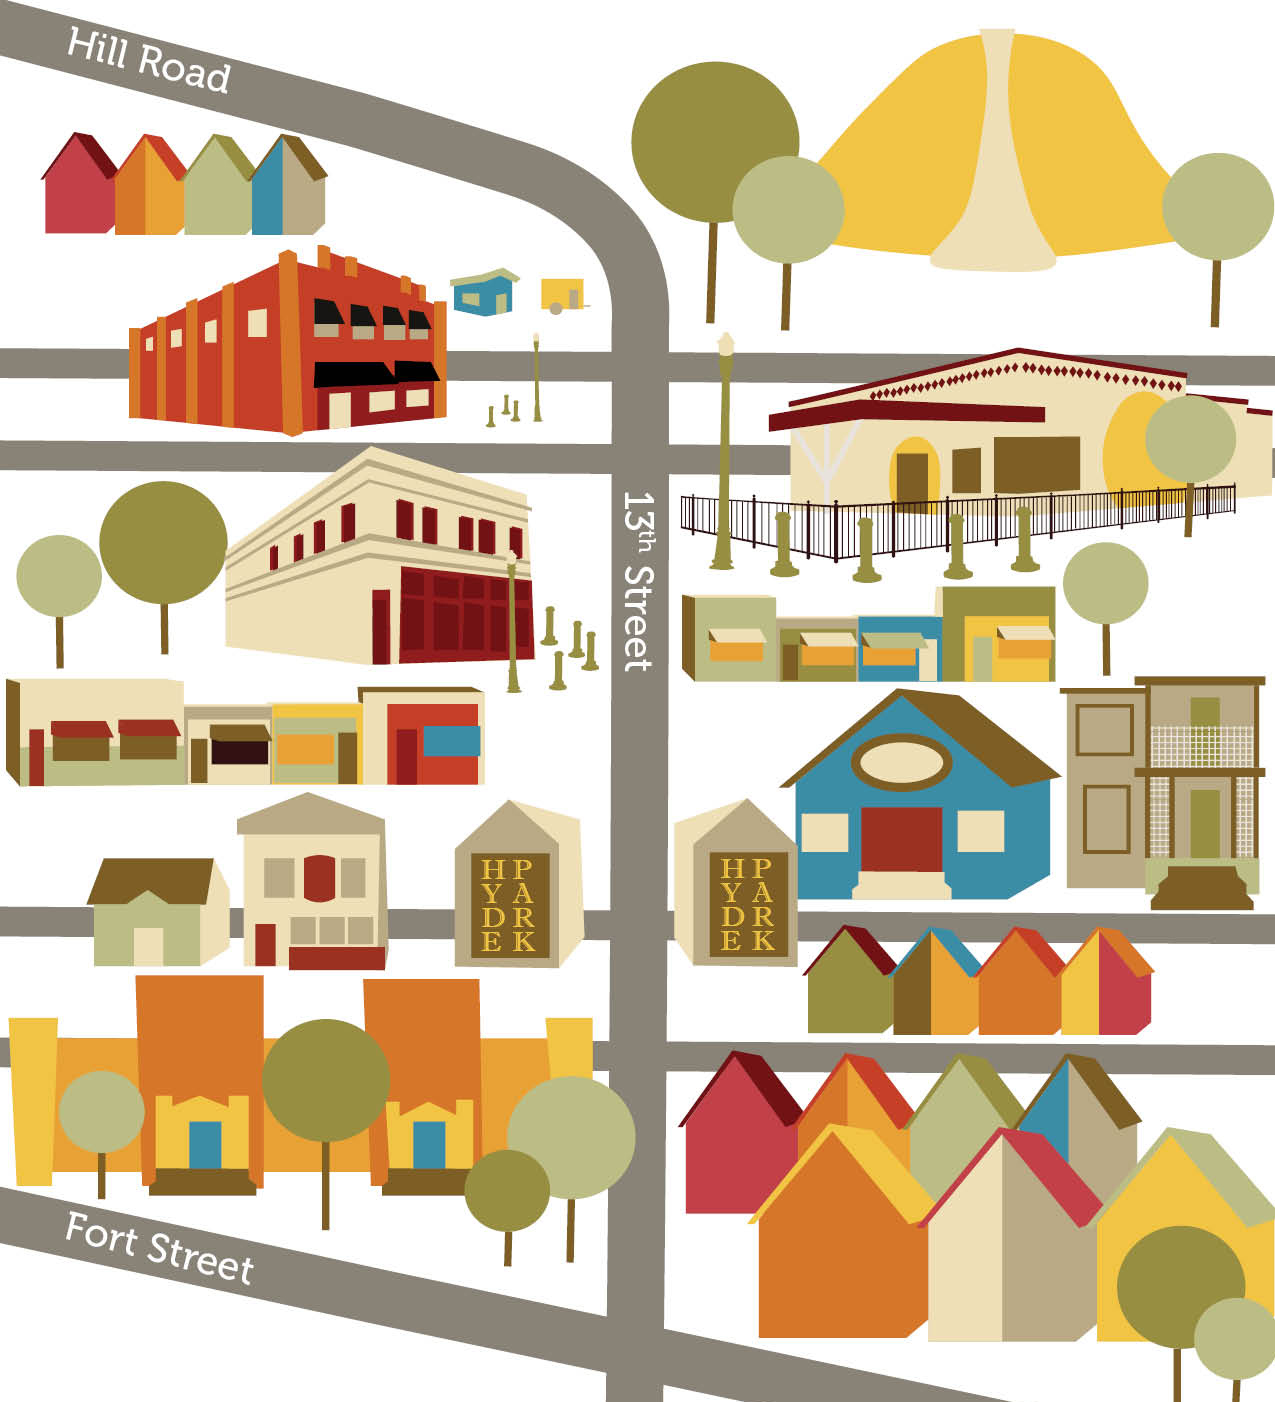 stylized map showing 13th street with illustrated buildings along it